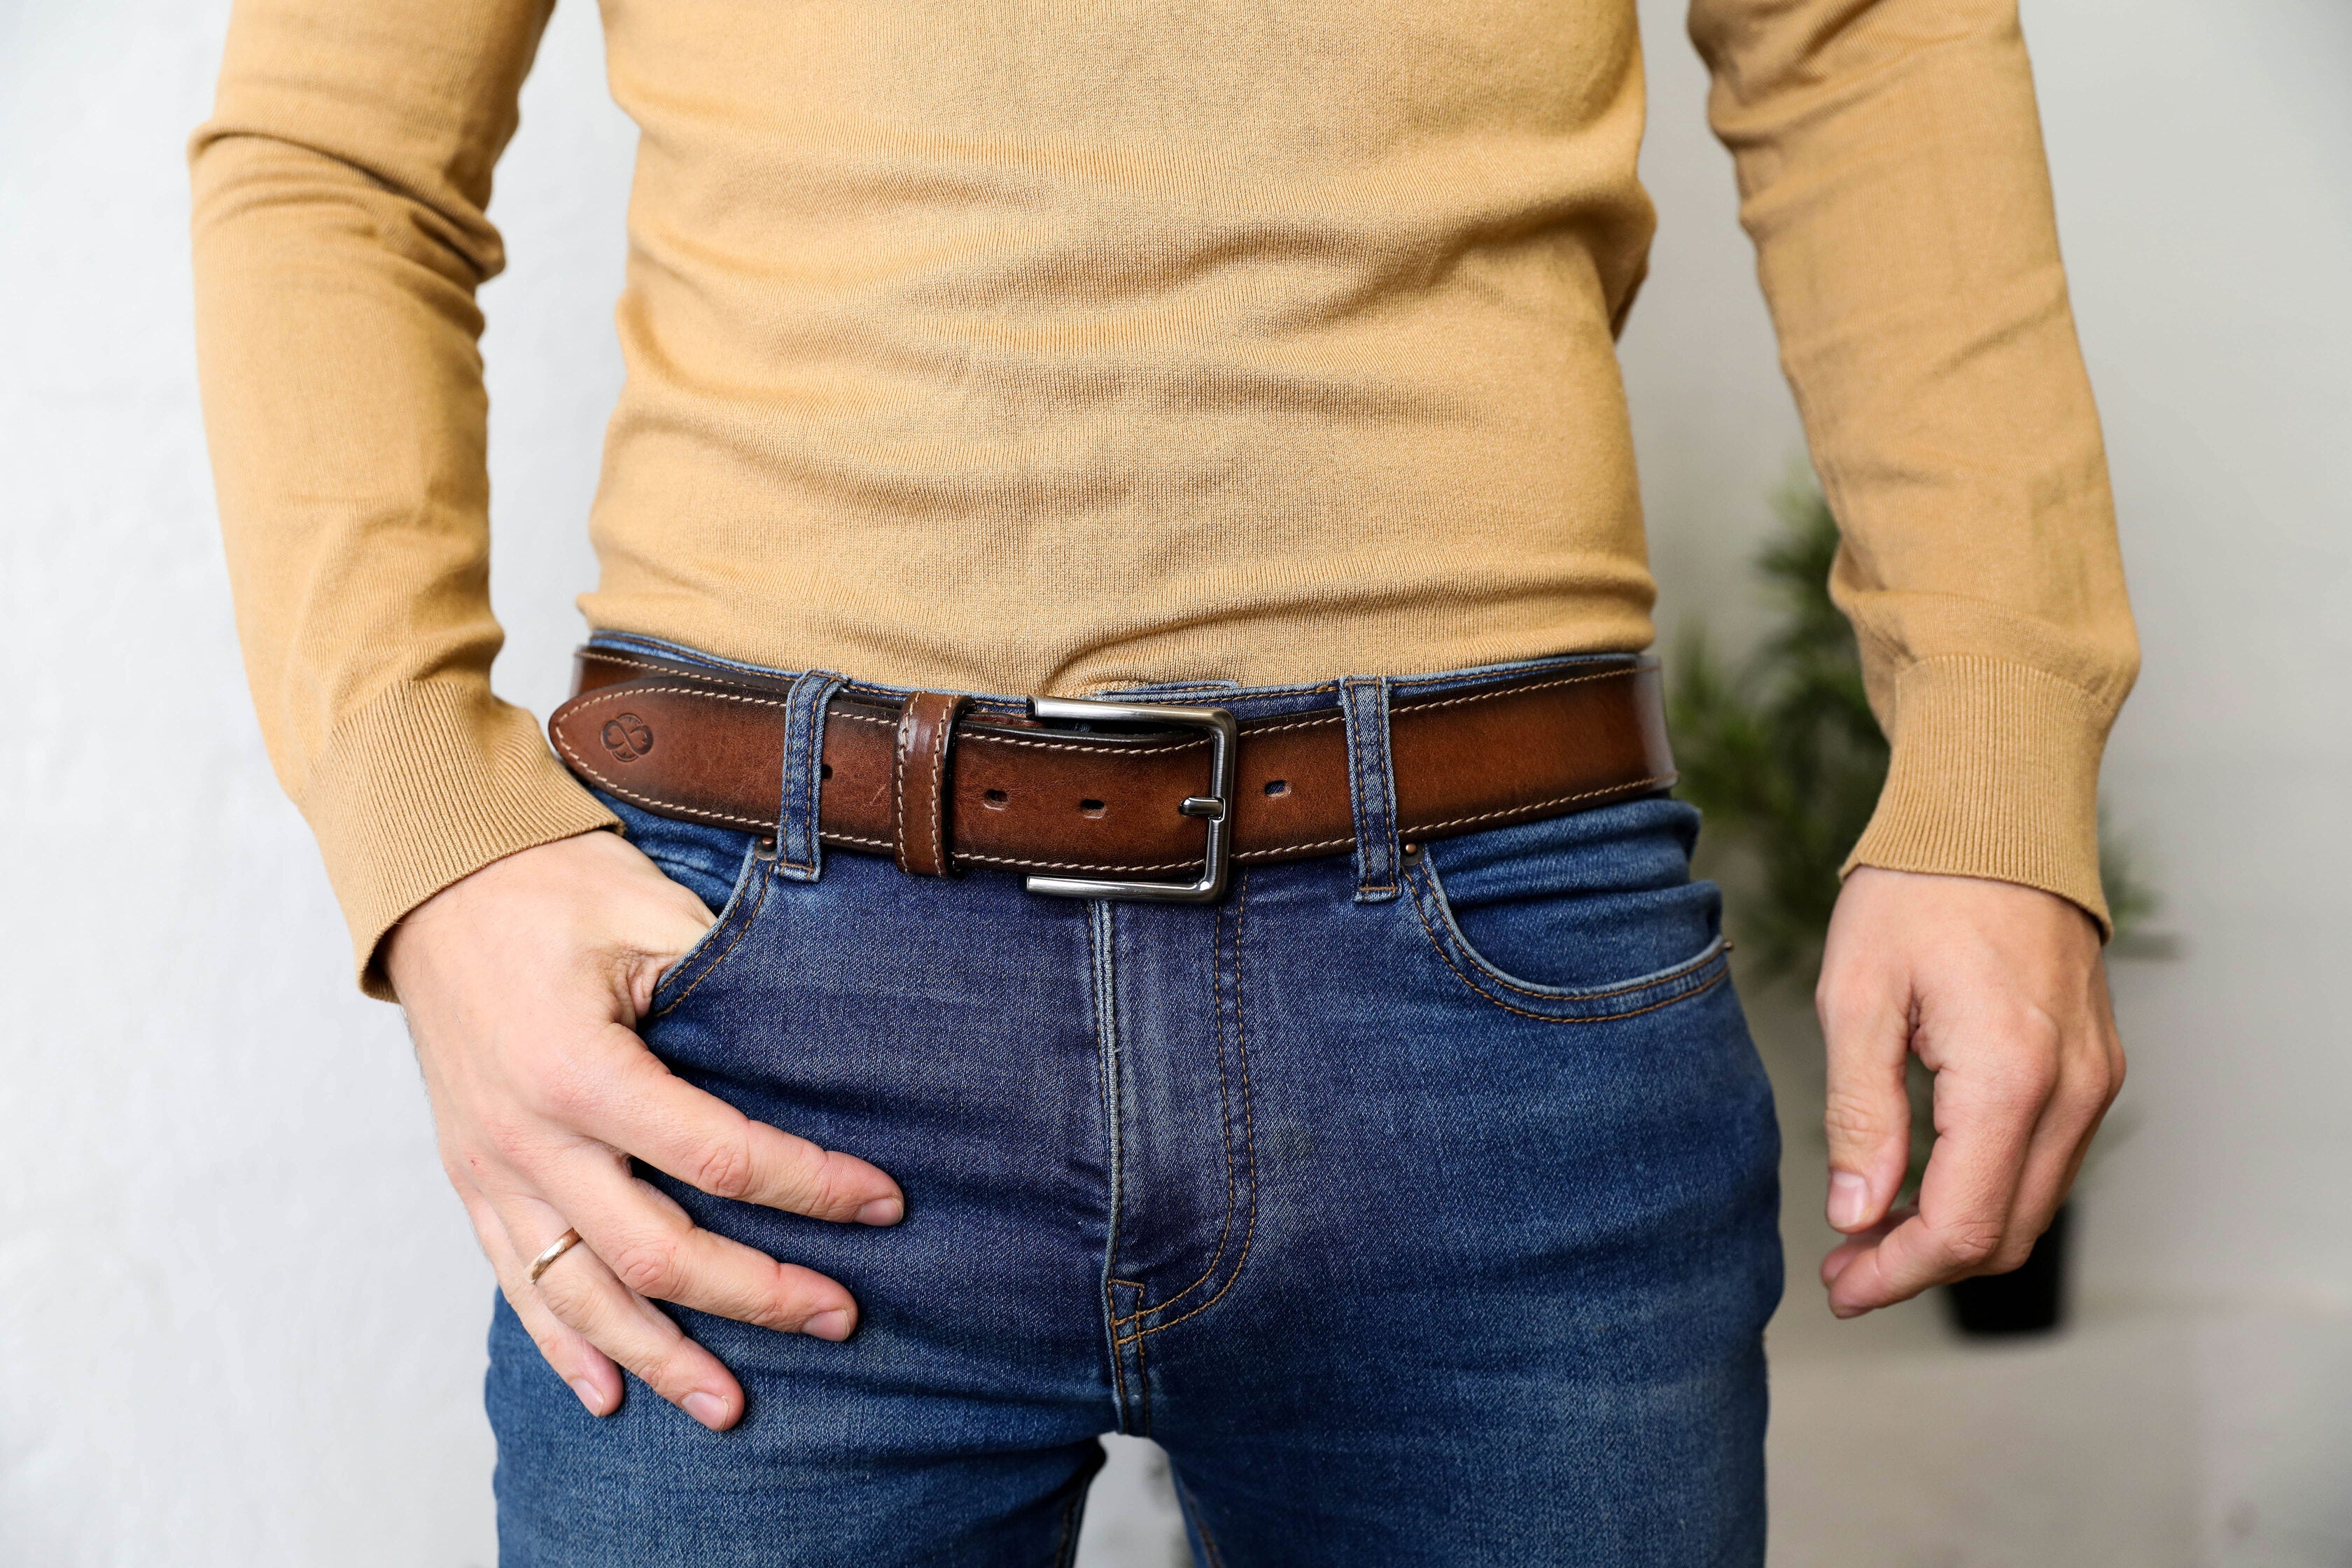 Brown Leather Belt - The Return of the Native